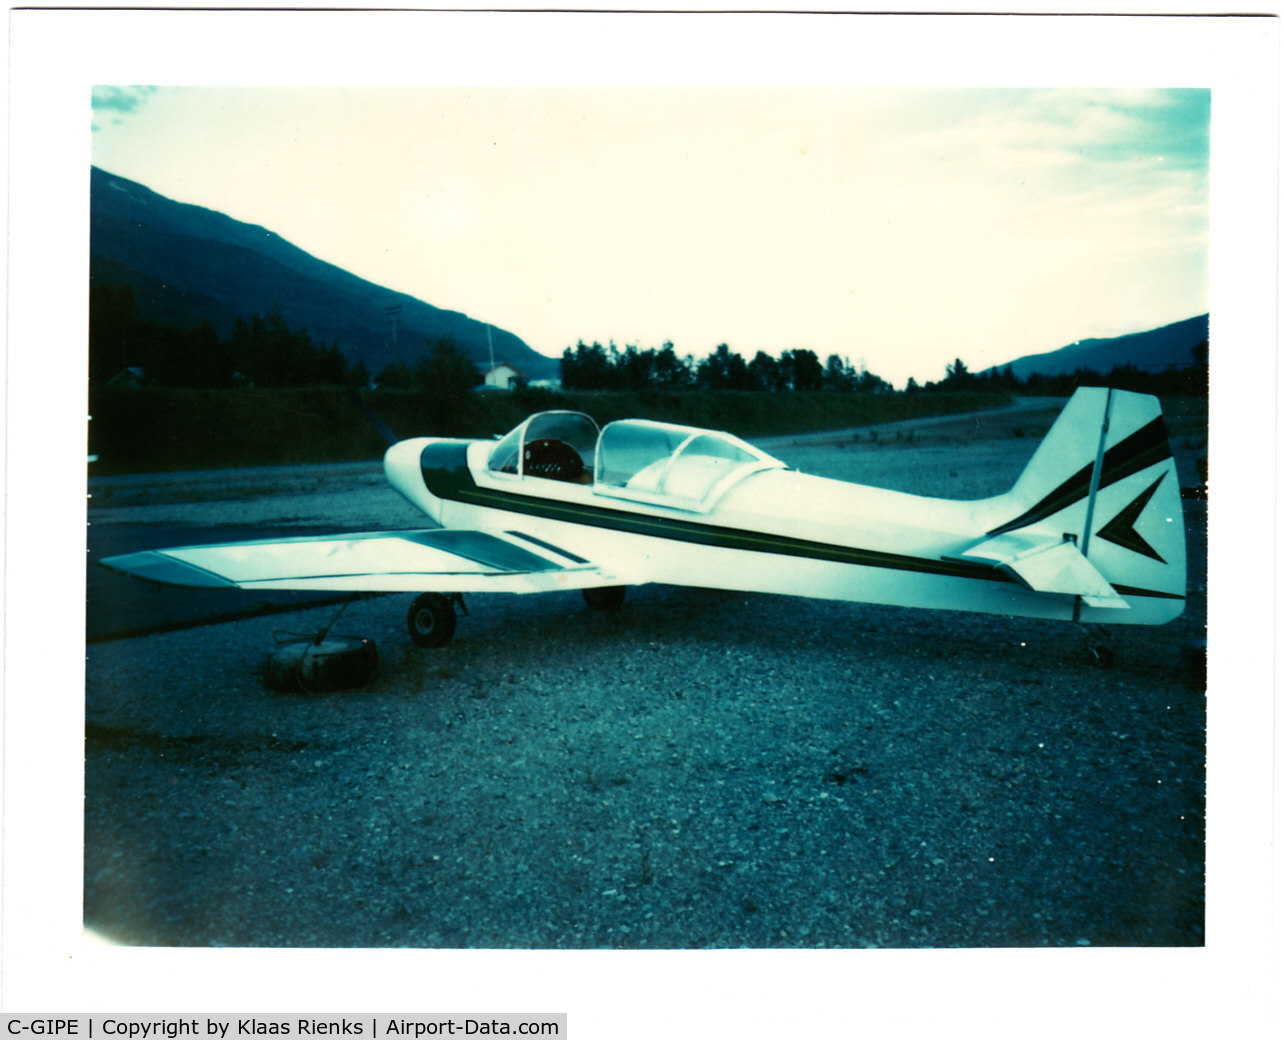 C-GIPE, 1978 Piel CP-301 Emeraude C/N 1491, My name is Klaas Rienks of Revelstoke bc ca
I built this plane in the late 70sh I put 140 hrs on it and sold it. last I heard it was in northern Alta or BC mc kenzie I think I have more pictures with regitration on plane flying.
let me know Klaas